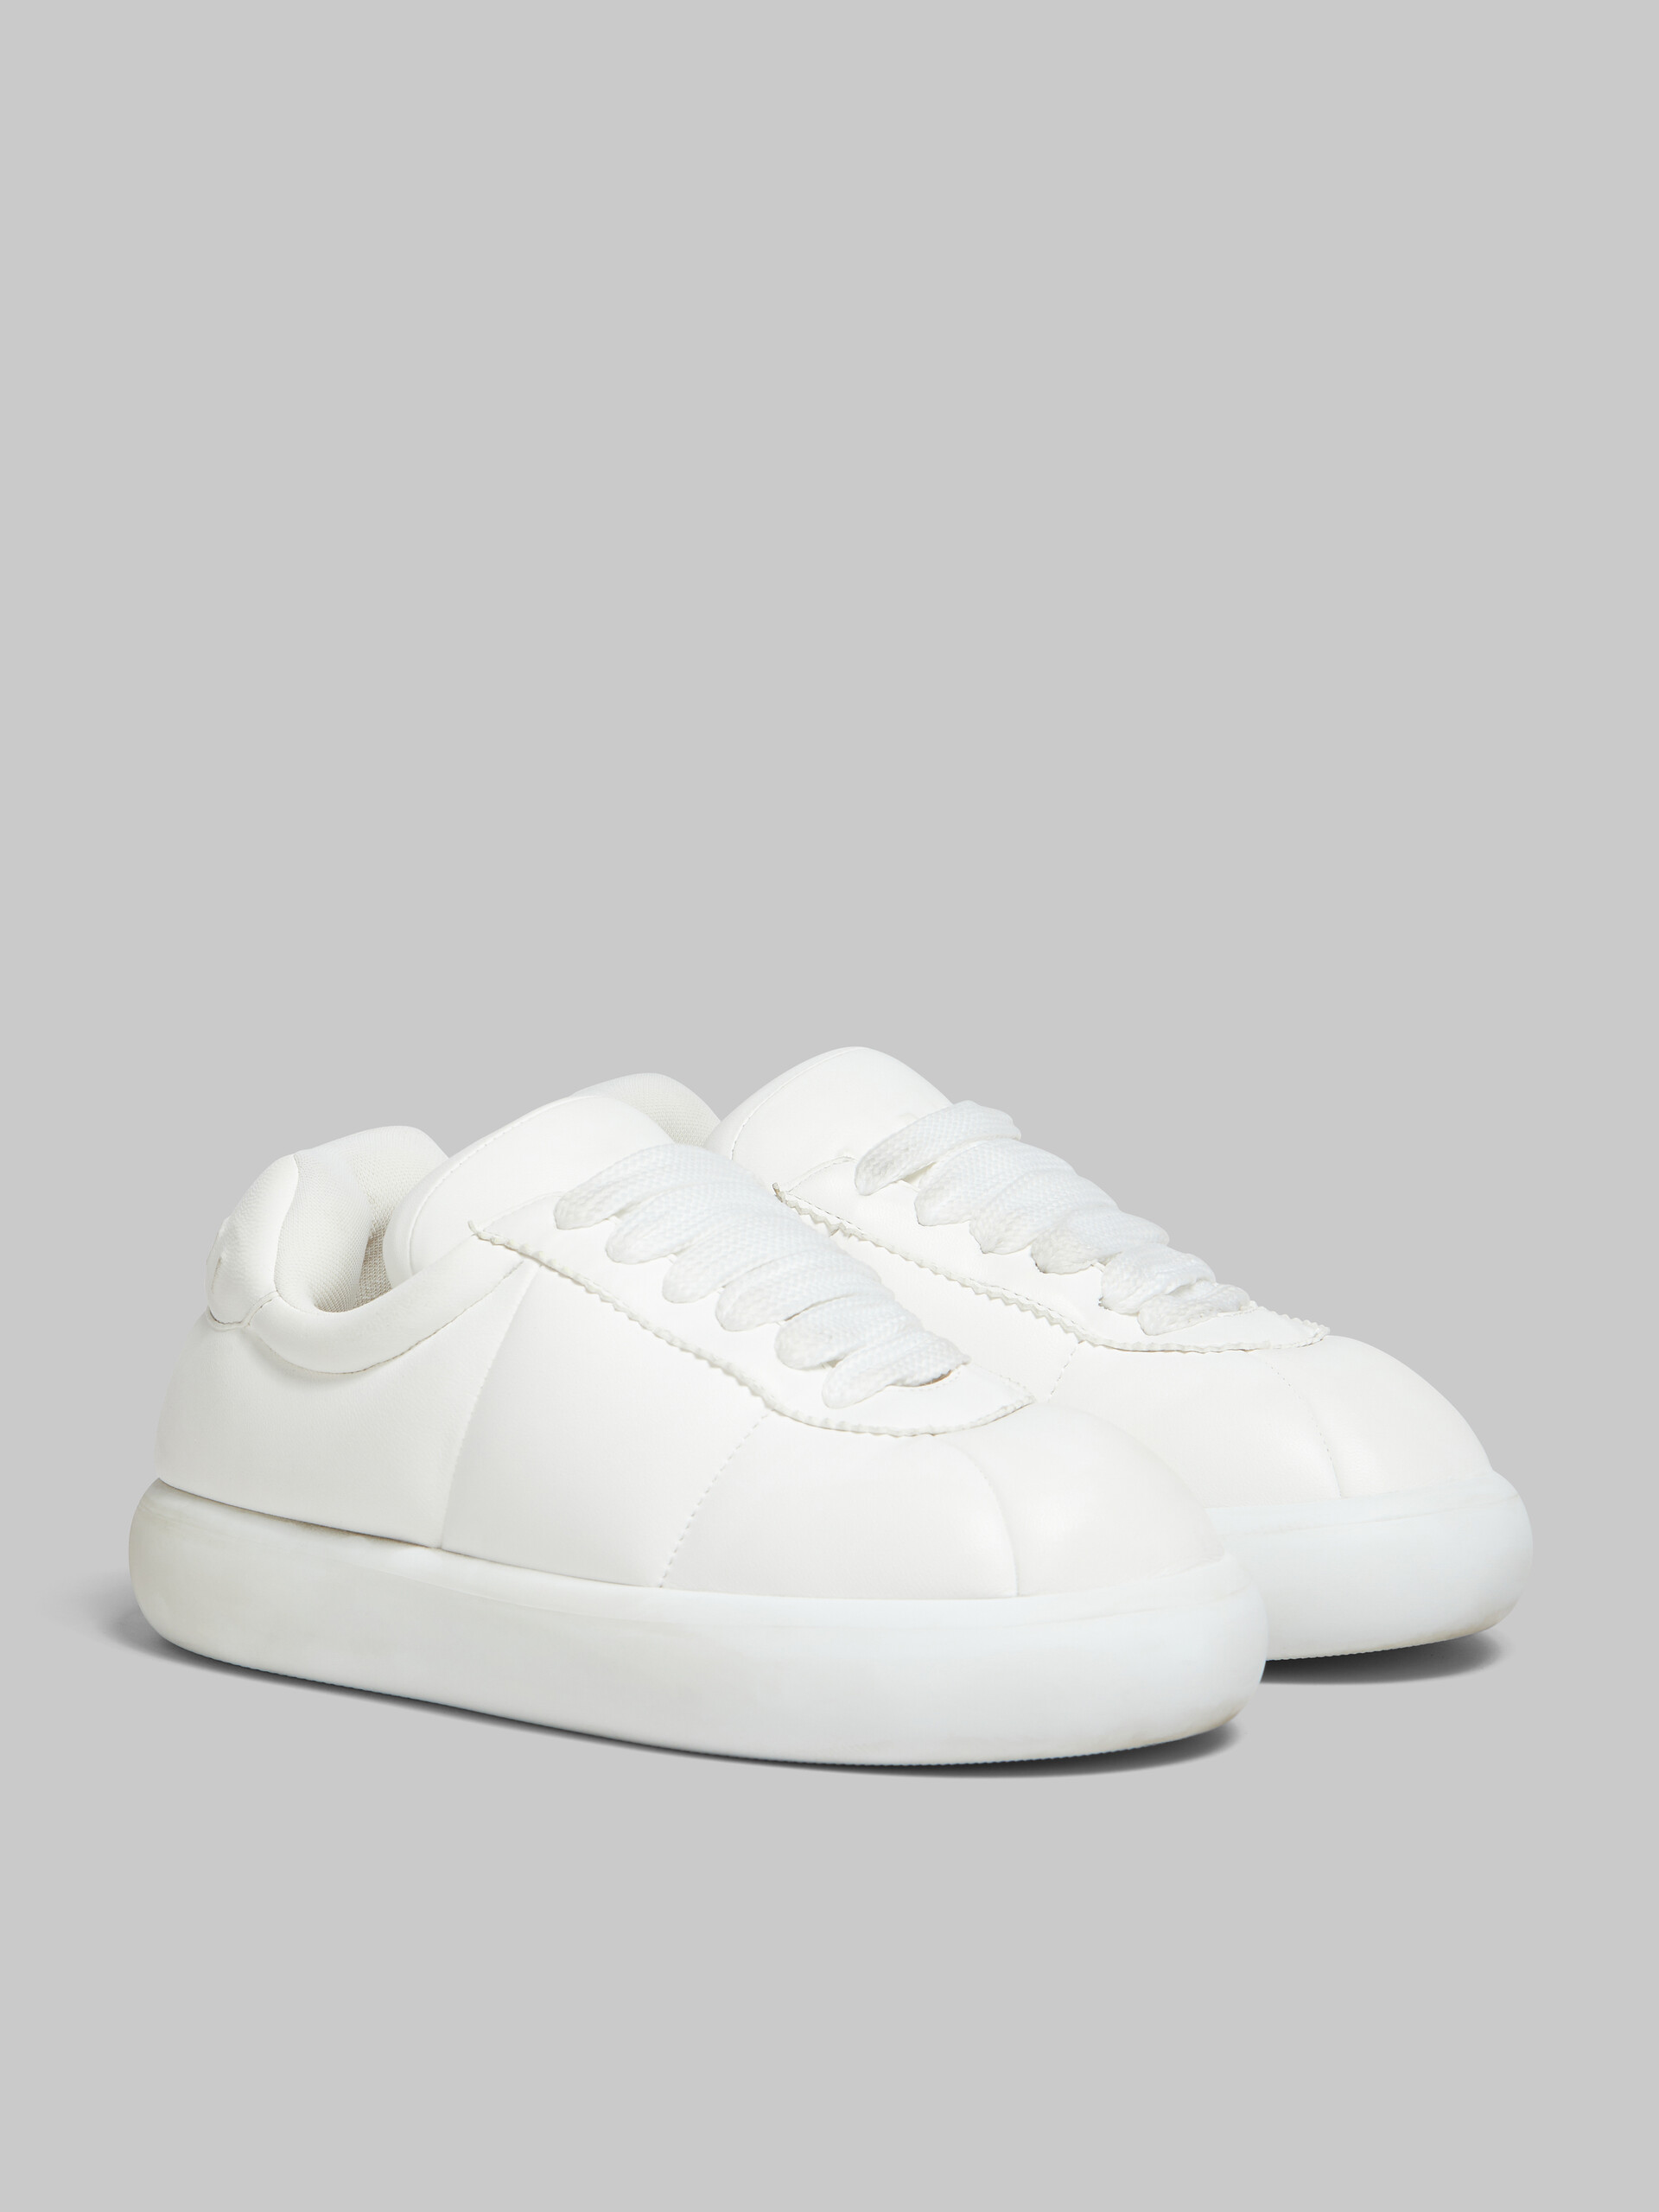 White leather BigFoot 2.0 sneaker - Sneakers - Image 2